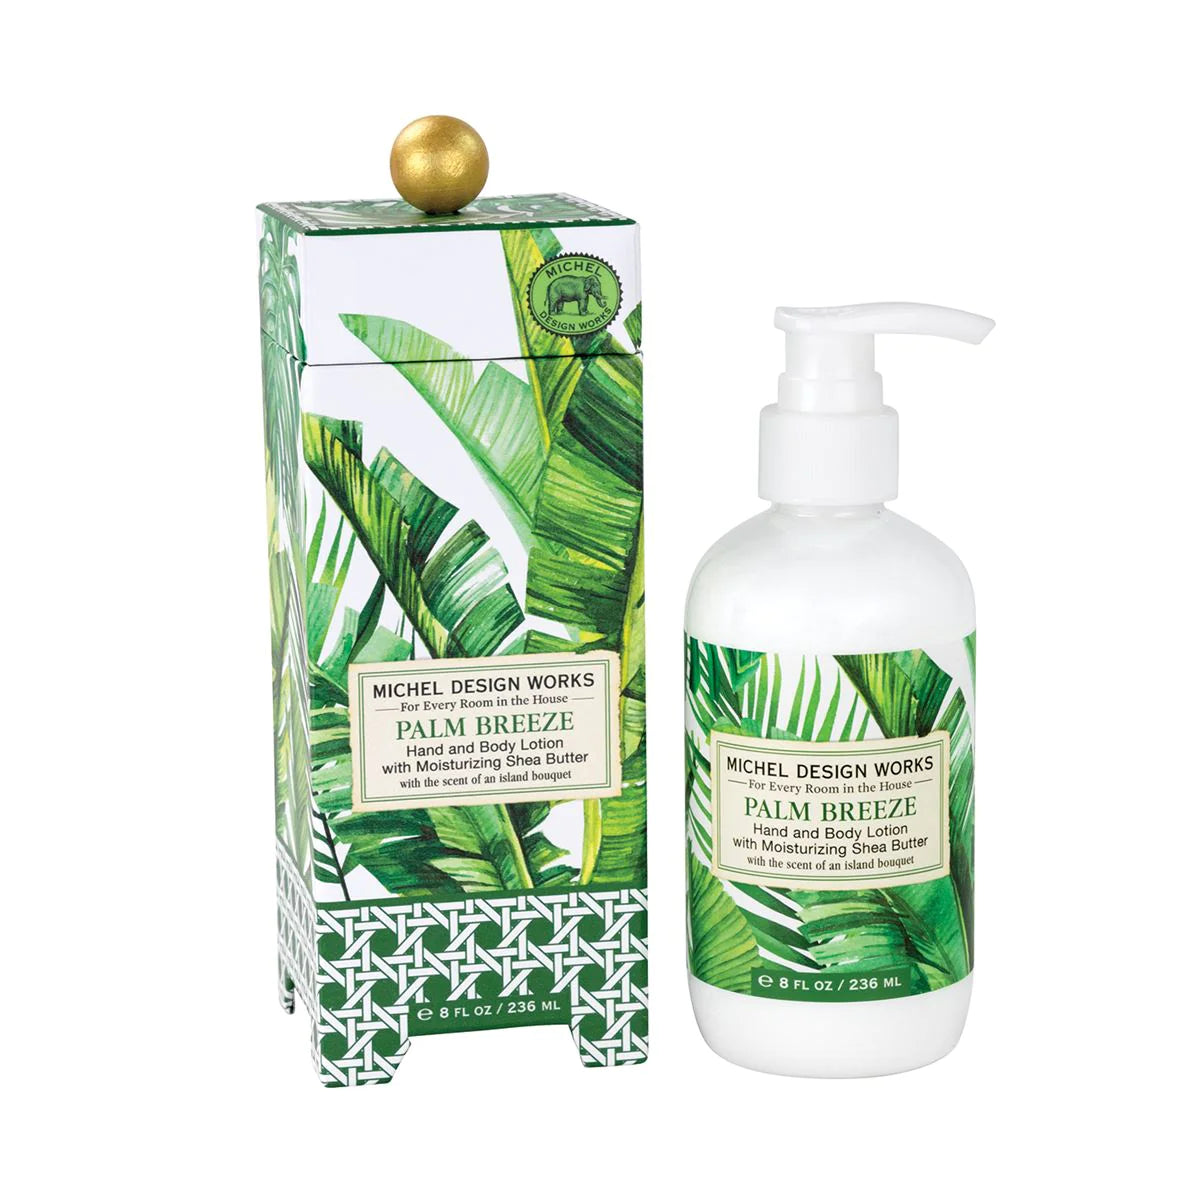 Michel Design Works - Palm Breeze (Hand and Body Lotion)